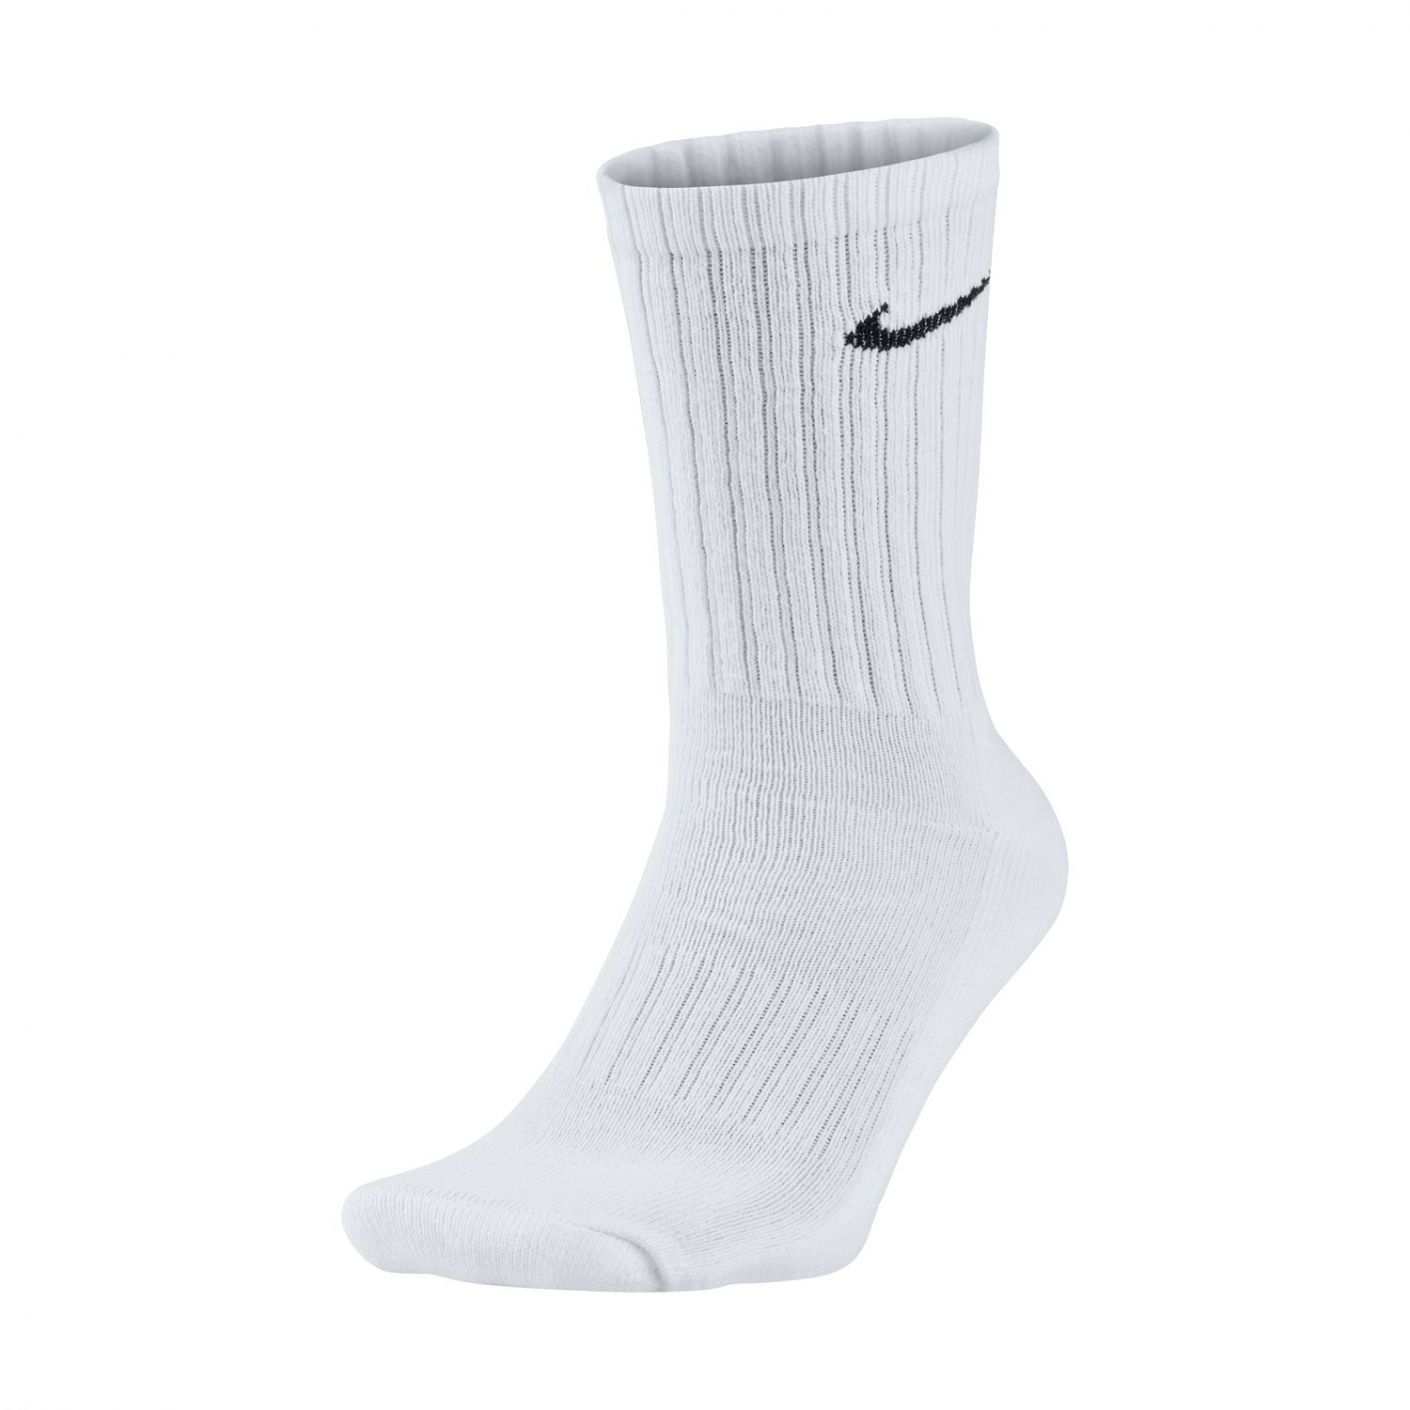 Nike - 3ppk cotton cushioned crew #101 SX4508